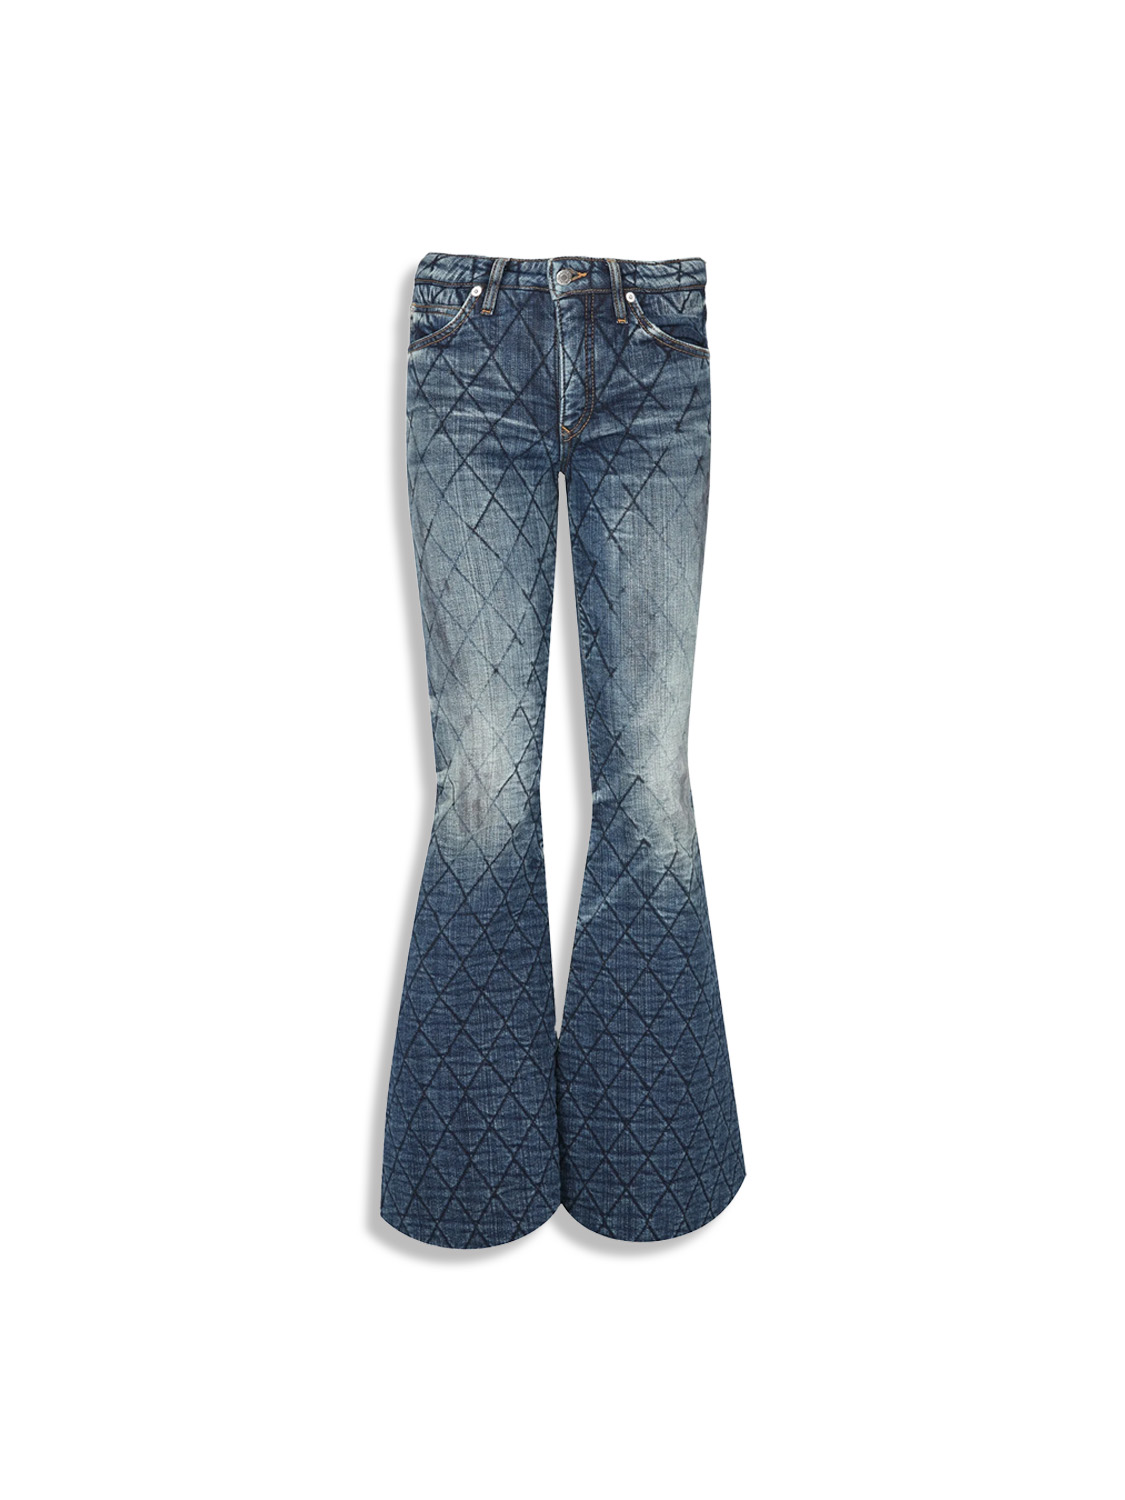 Heidi - jeans flare pants with diamond pattern and light wash